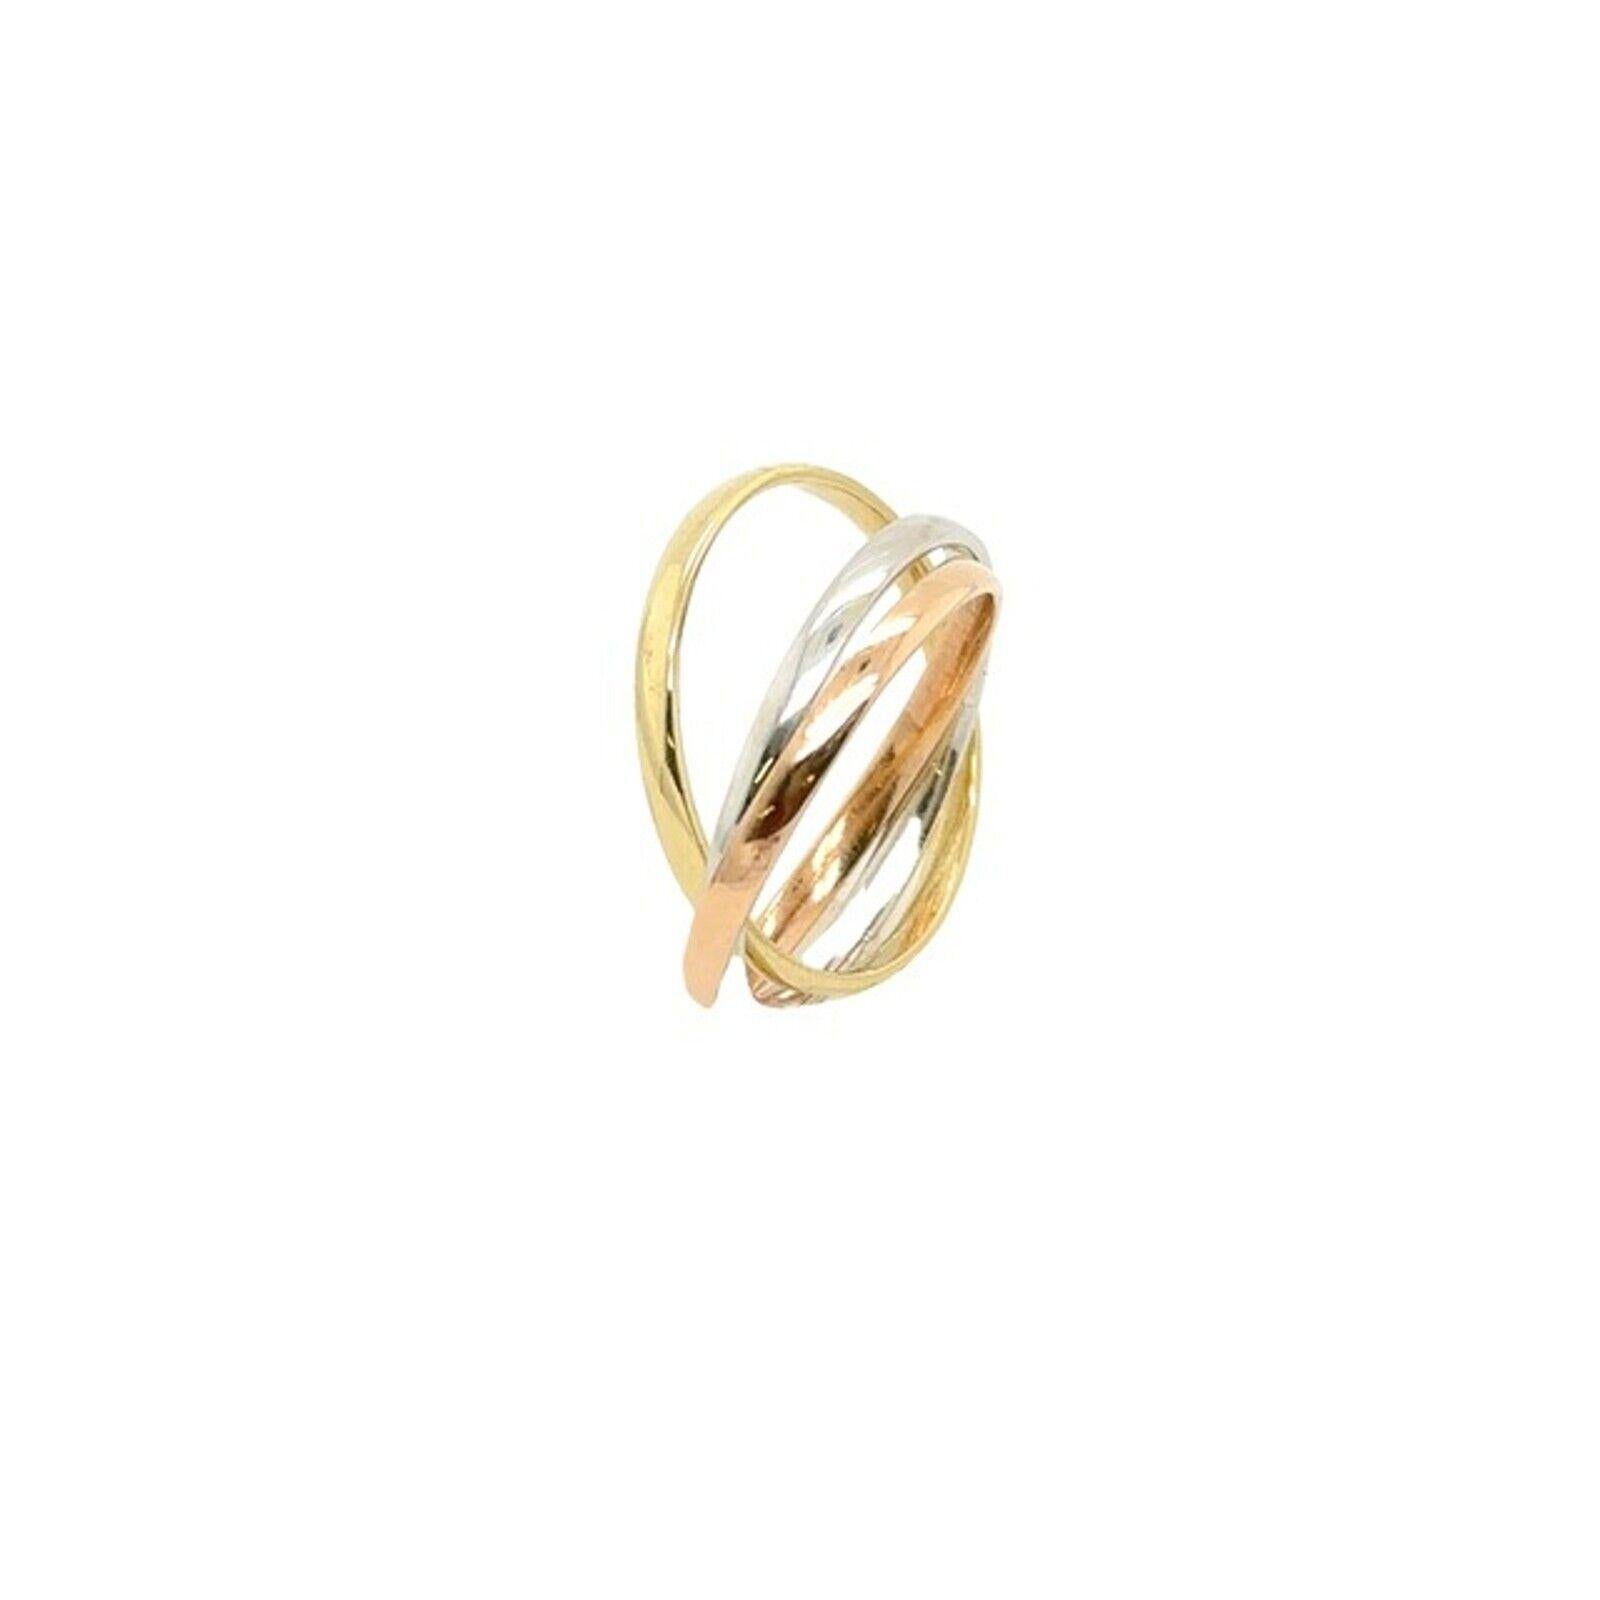 This wedding band is set in 9ct White, Yellow and Rose Gold. It is the perfect choice for an elegant and classic wedding band.

Additional Information:
Total Weight: 3.0g
Width of Band: 2mm
Ring Size: N1/2
SMS8506